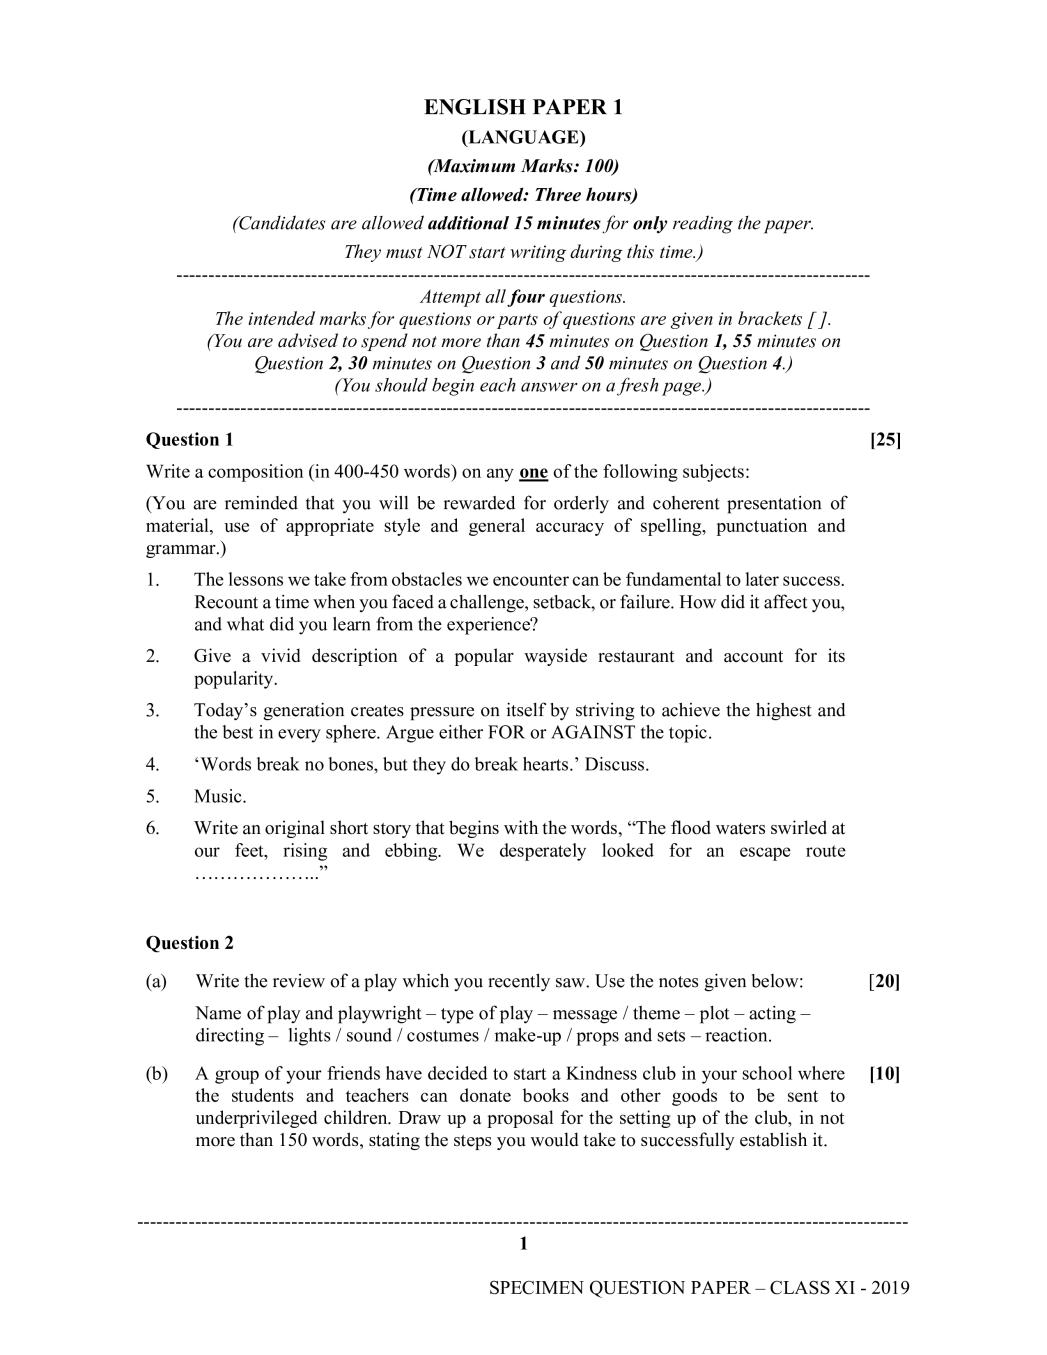 ISC Class 11 Specimen Paper for English Language (Paper 1) - Page 1